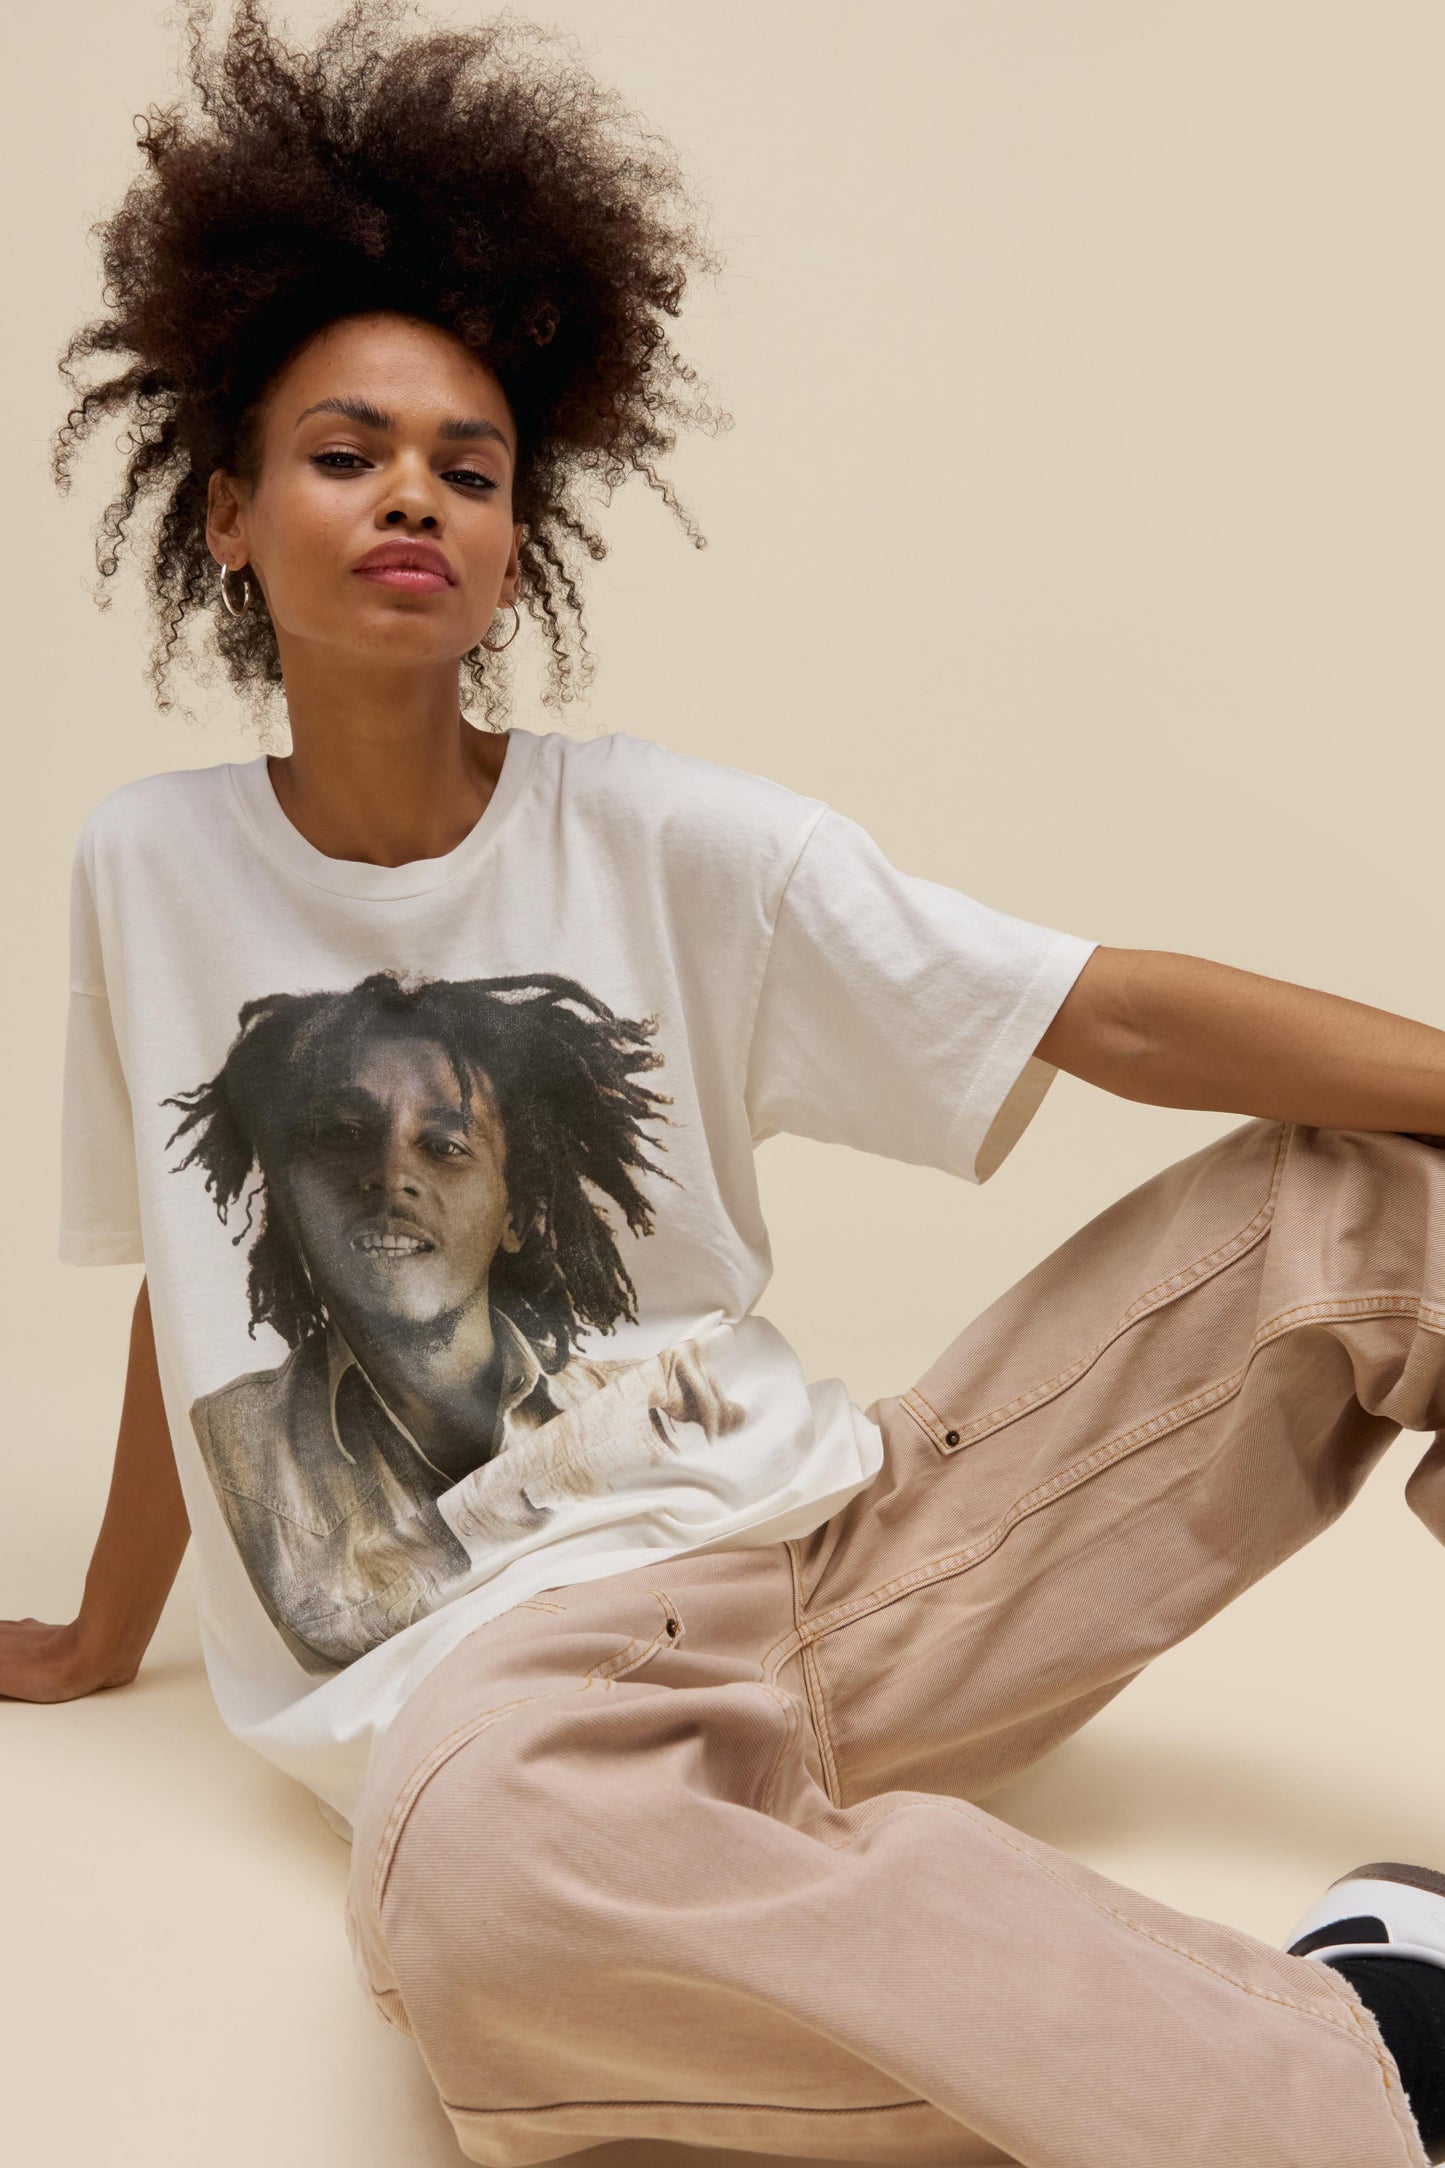 Curly-haired model wearing an oversized Bob Marley graphic tee in vintage white featuring a greyscale portrait of the artist